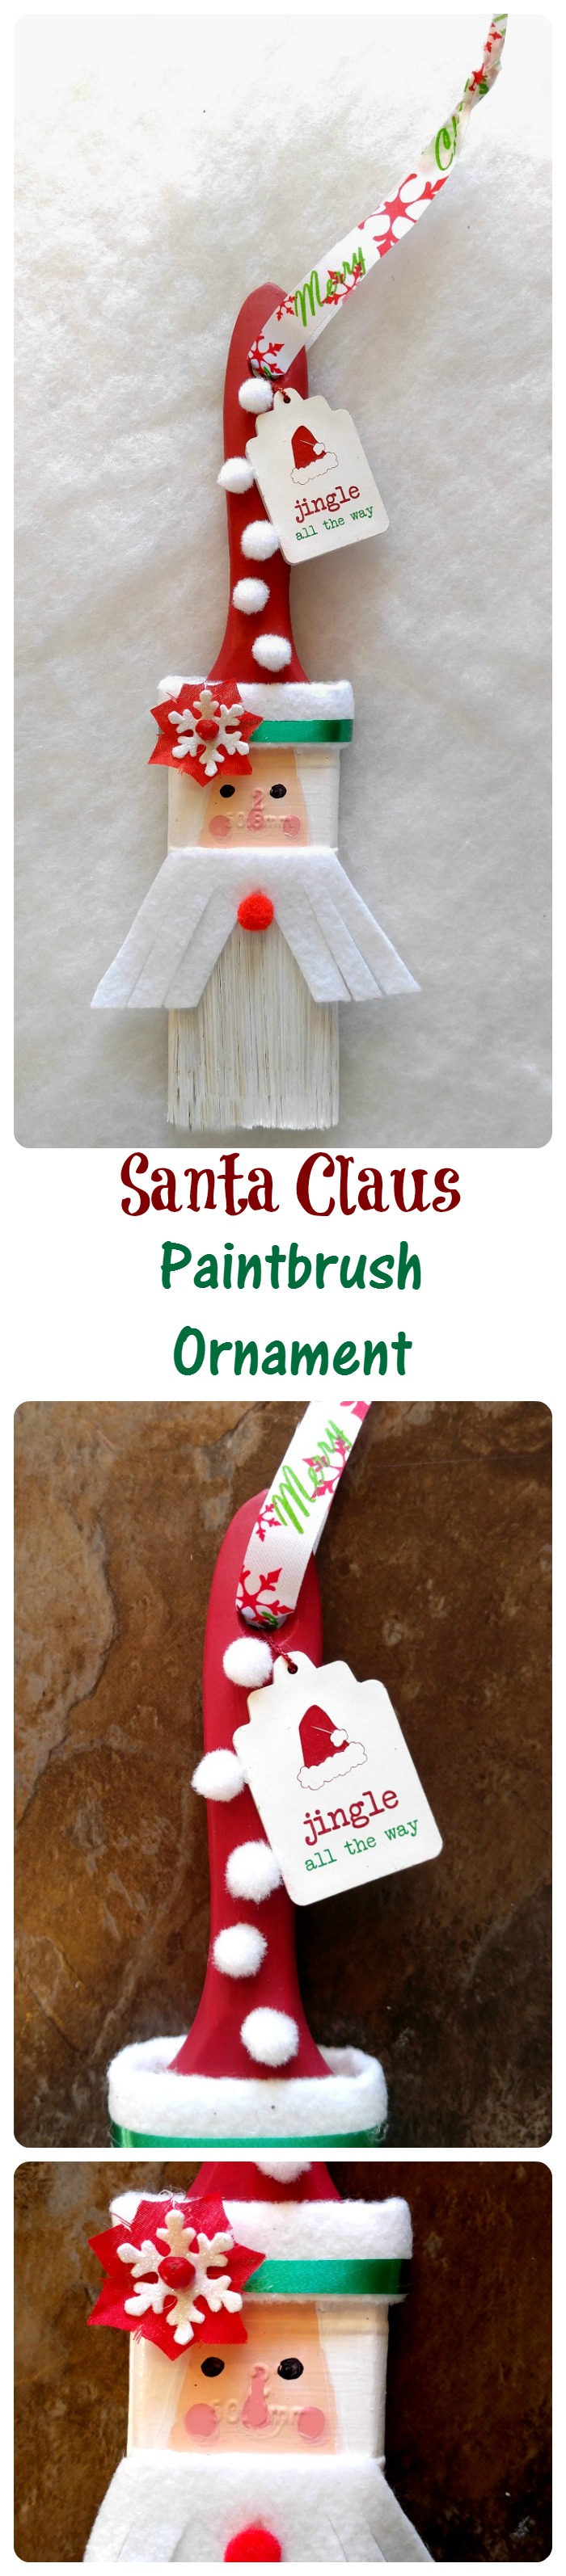 This Santa Paint Brush Ornament is whimsical and fun to make and will look cute on a Christmas tree or as a wall hanging.